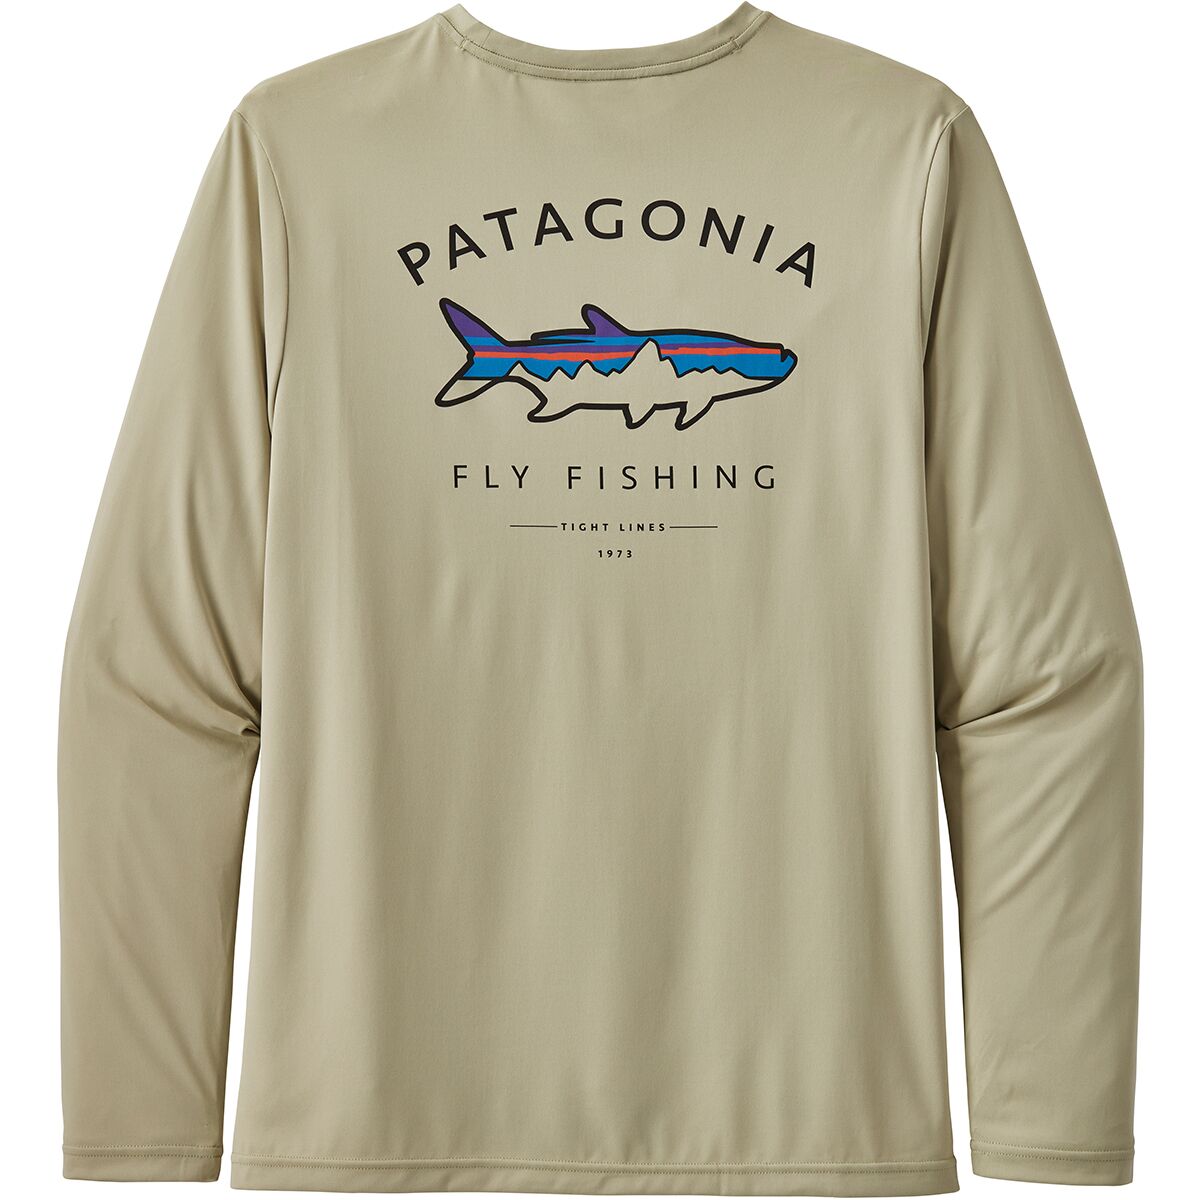 Patagonia Men's Fly Fishing Shirt Long Sleeve Size Small S Color Red Fly  Fish 